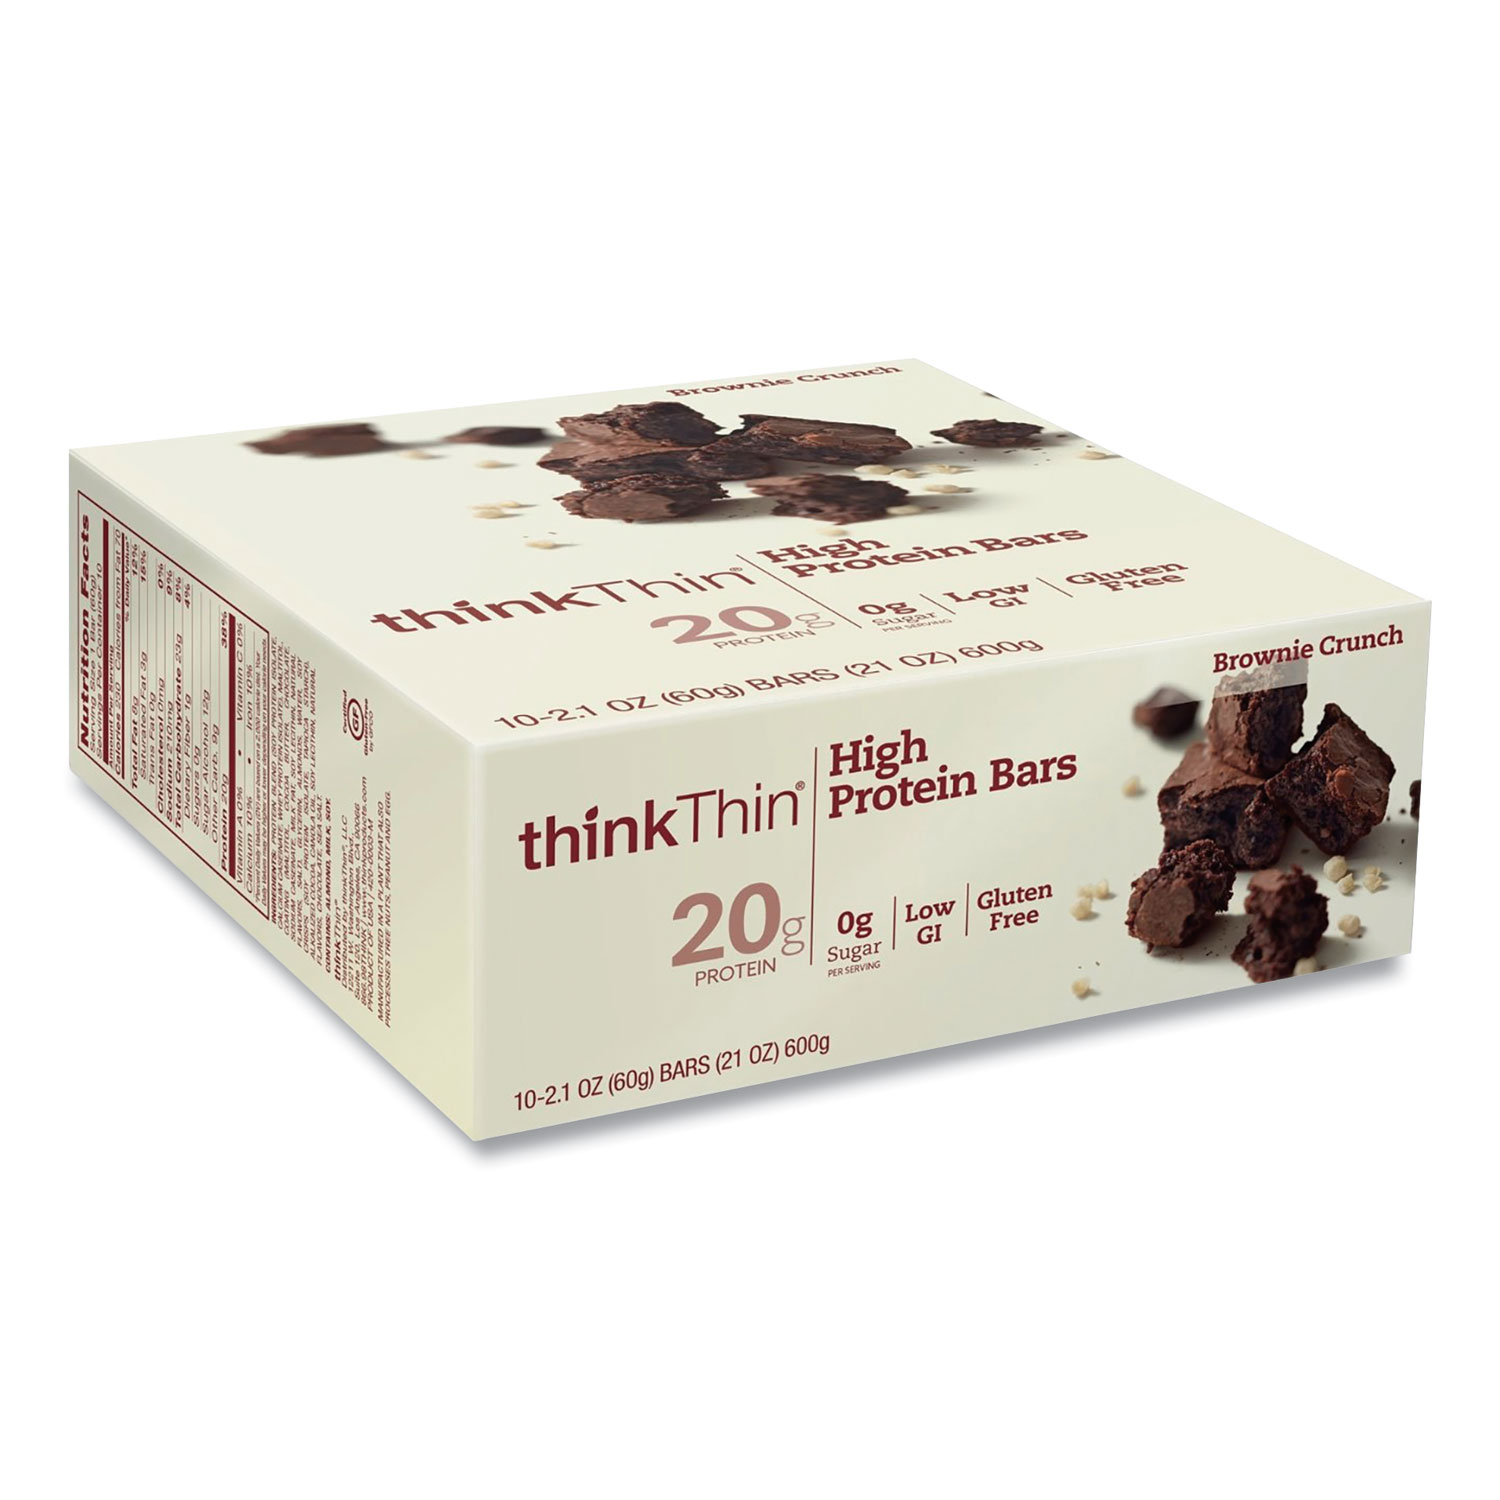  thinkThin 70146 High Protein Bars, Brownie Crunch, 2.1 oz Bar, 10 Bars/Carton, Free Delivery in 1-4 Business Days (GRR20902478) 